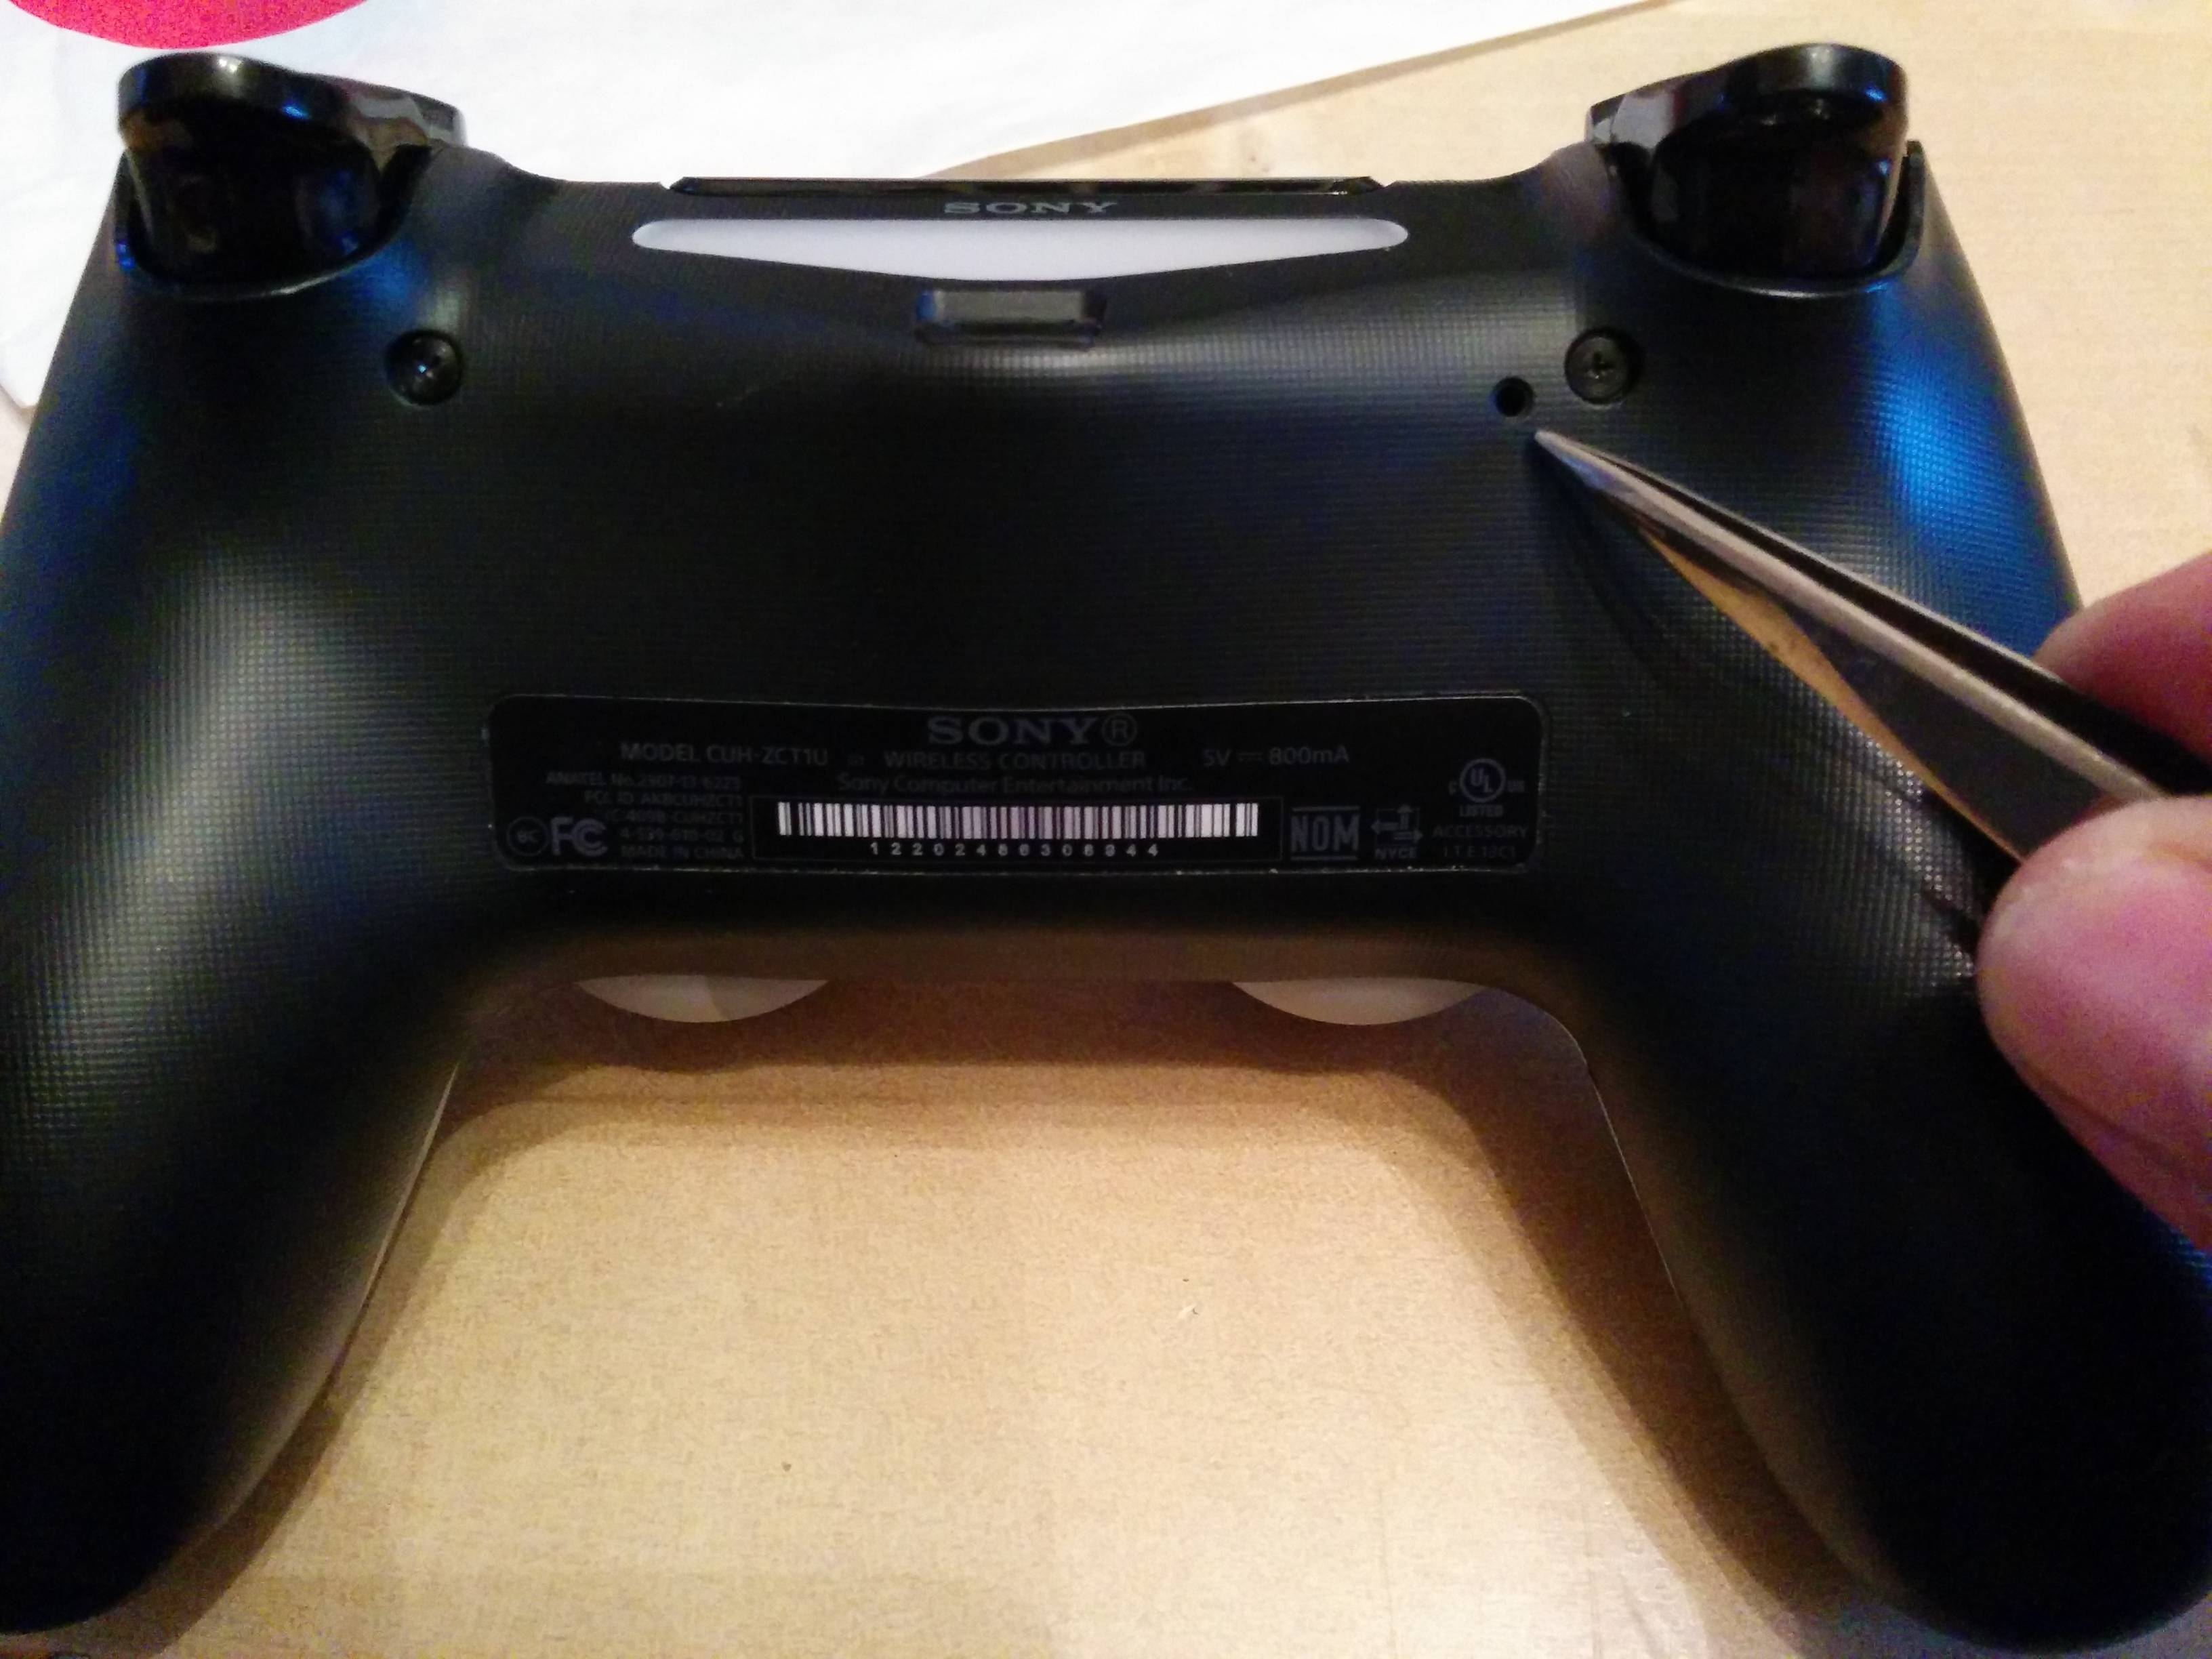 Locate the small reset button on the back of the controller.
Use a paperclip or similar object to press and hold the reset button for a few seconds.